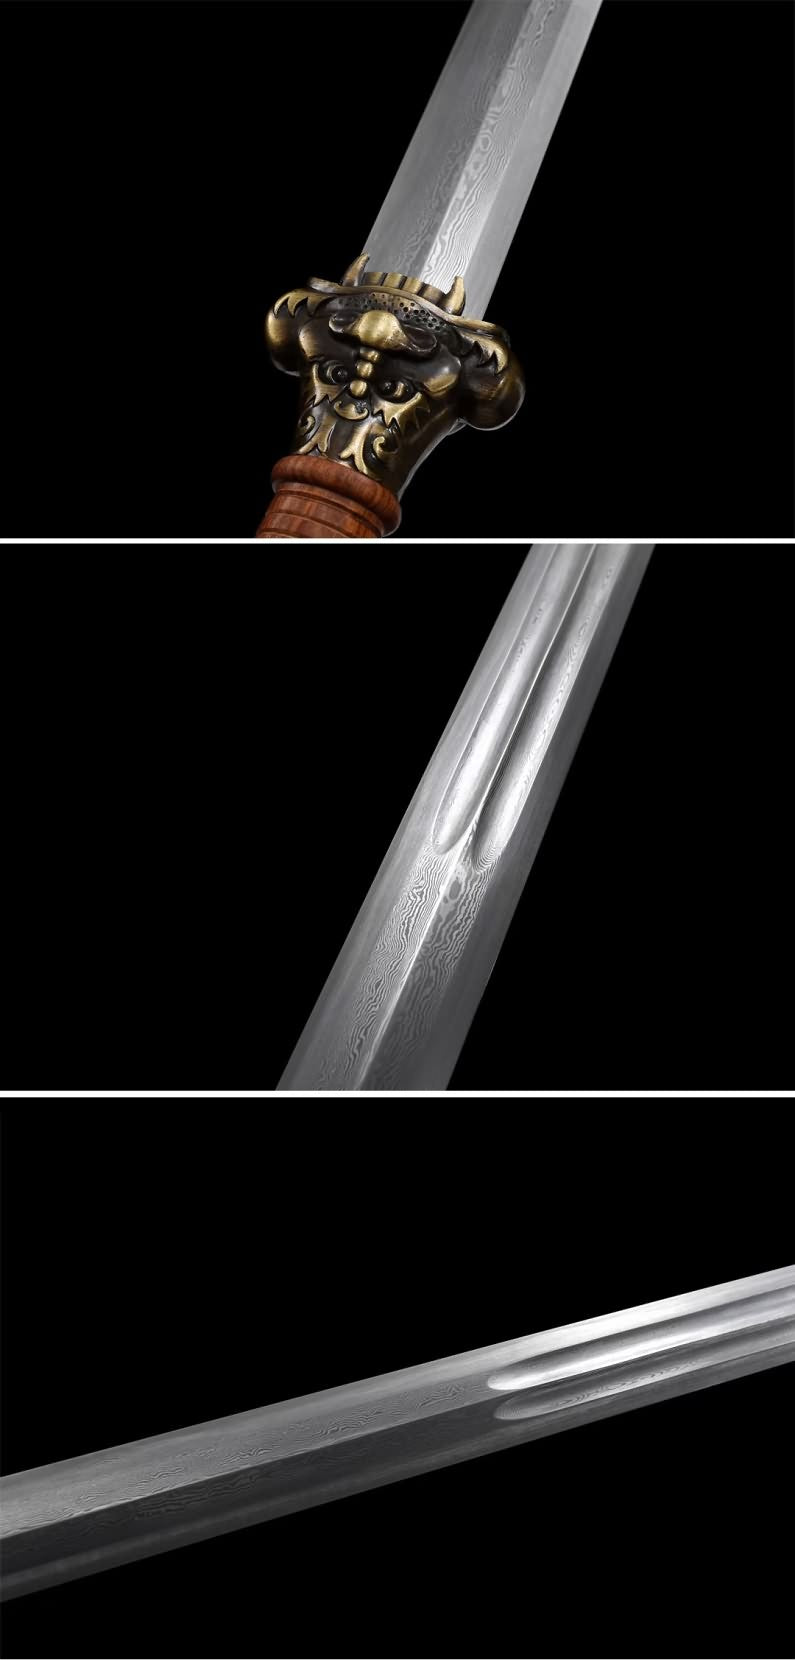 Loong sword,Forged Damascus steel blade,Alloy fittings,Rosewood scabbard